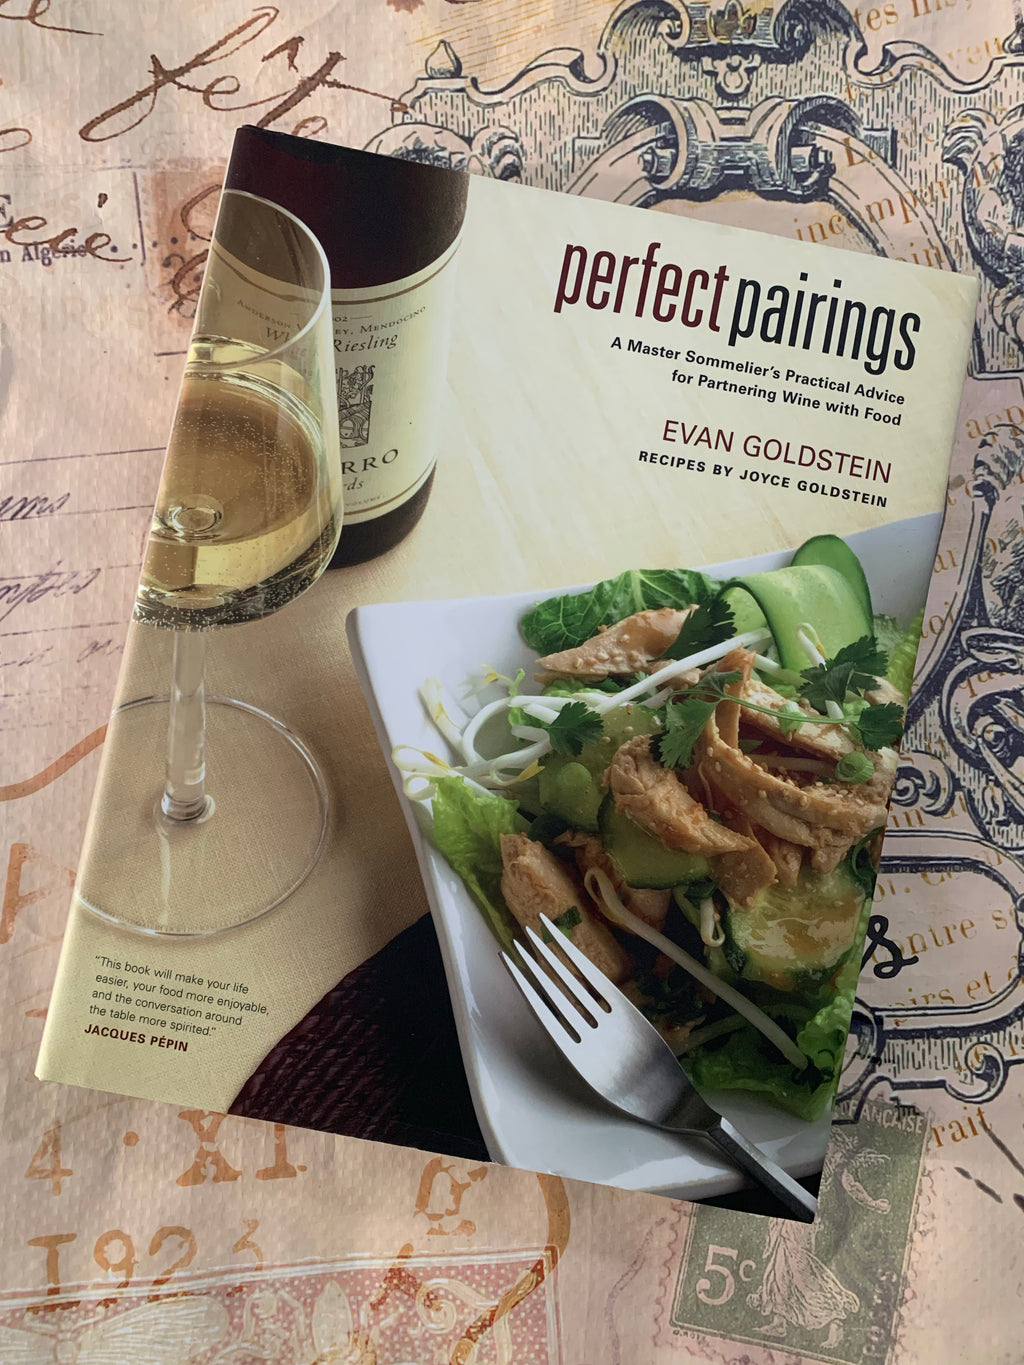 Perfect Pairings: A Master Sommelier's Practical Advice for Partnering Wine and Food- By Evan Goldstein